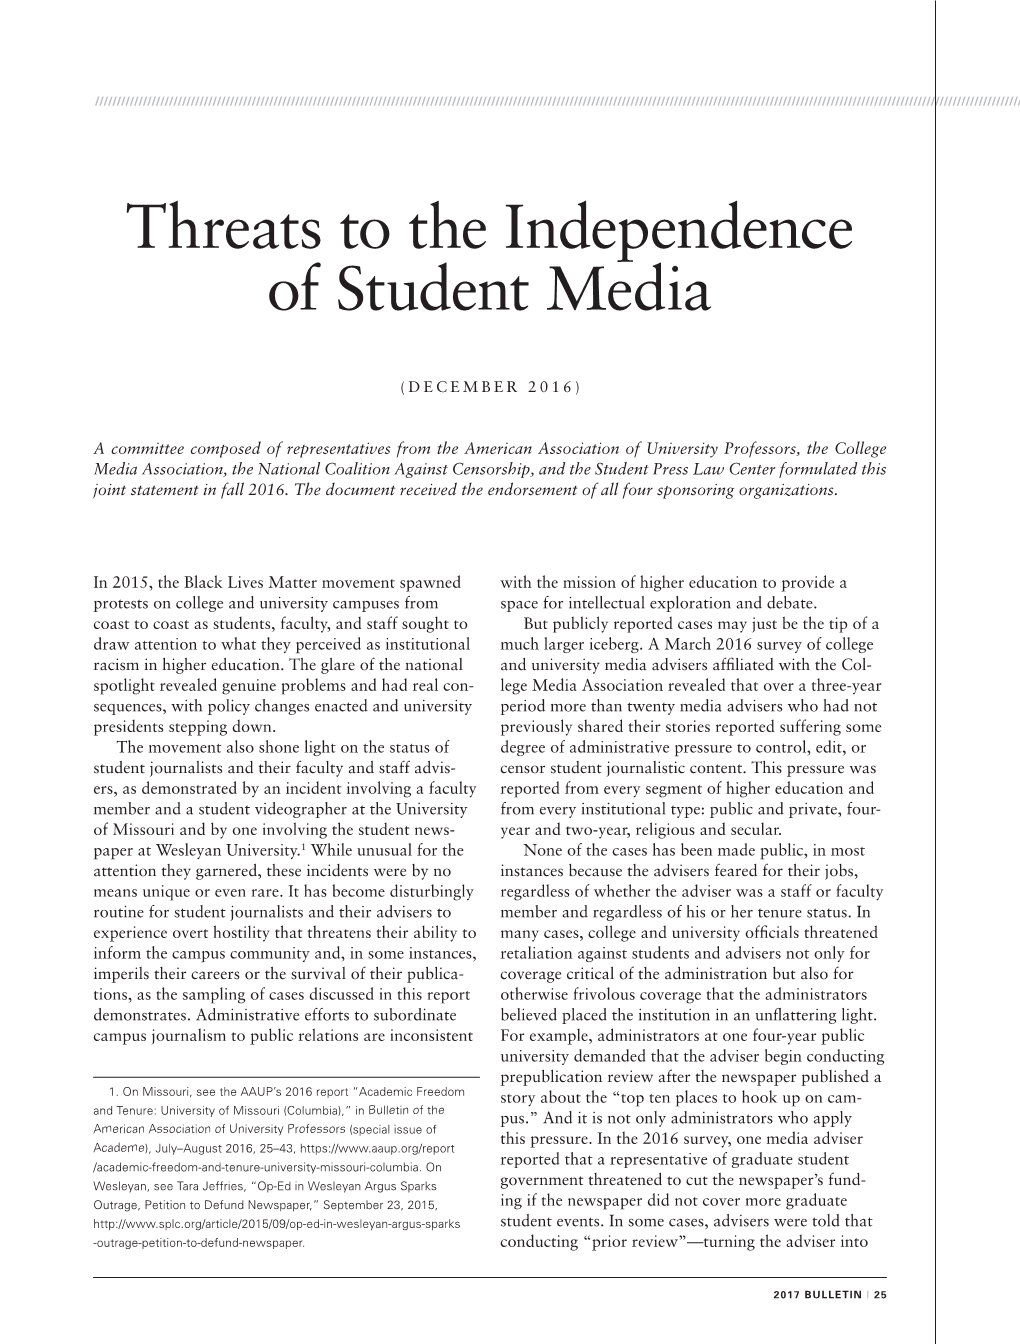 Threats to the Independence of Student Media